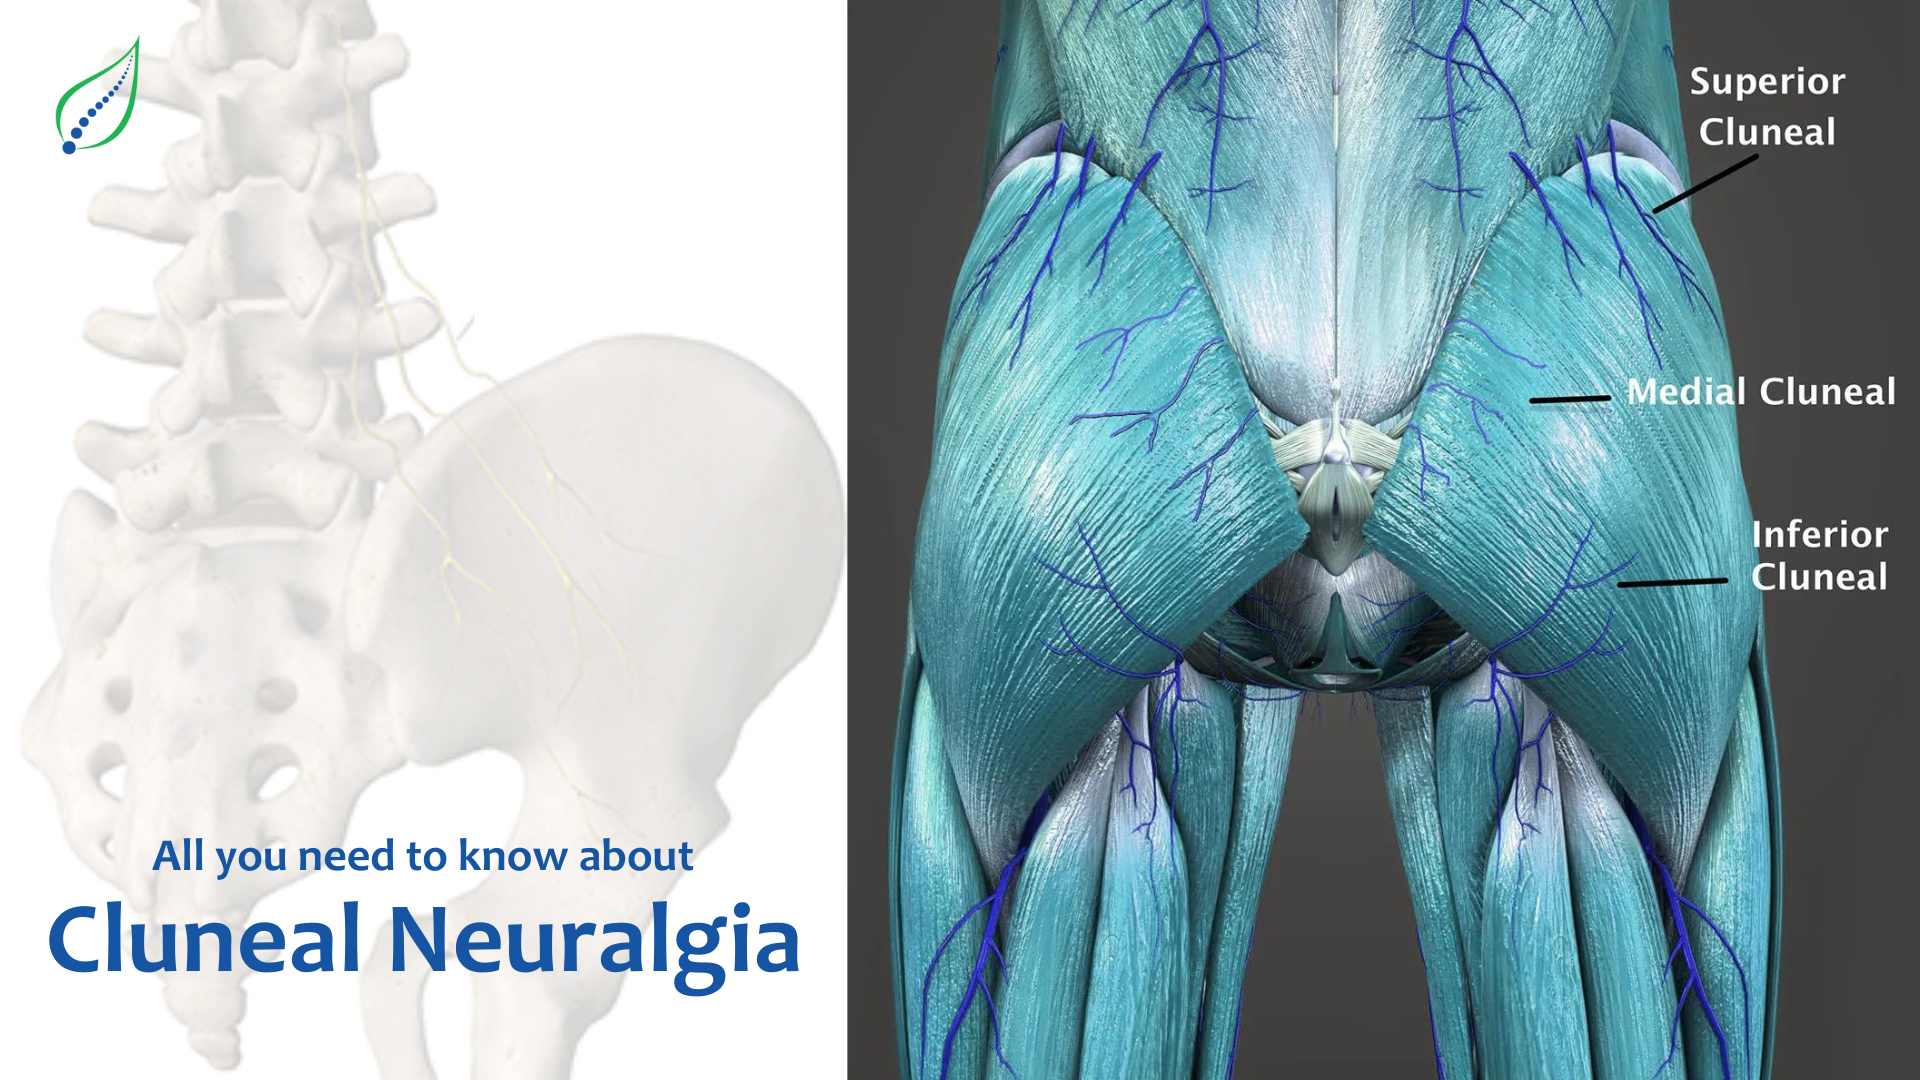 All you need to know about Cluneal Neuralgia